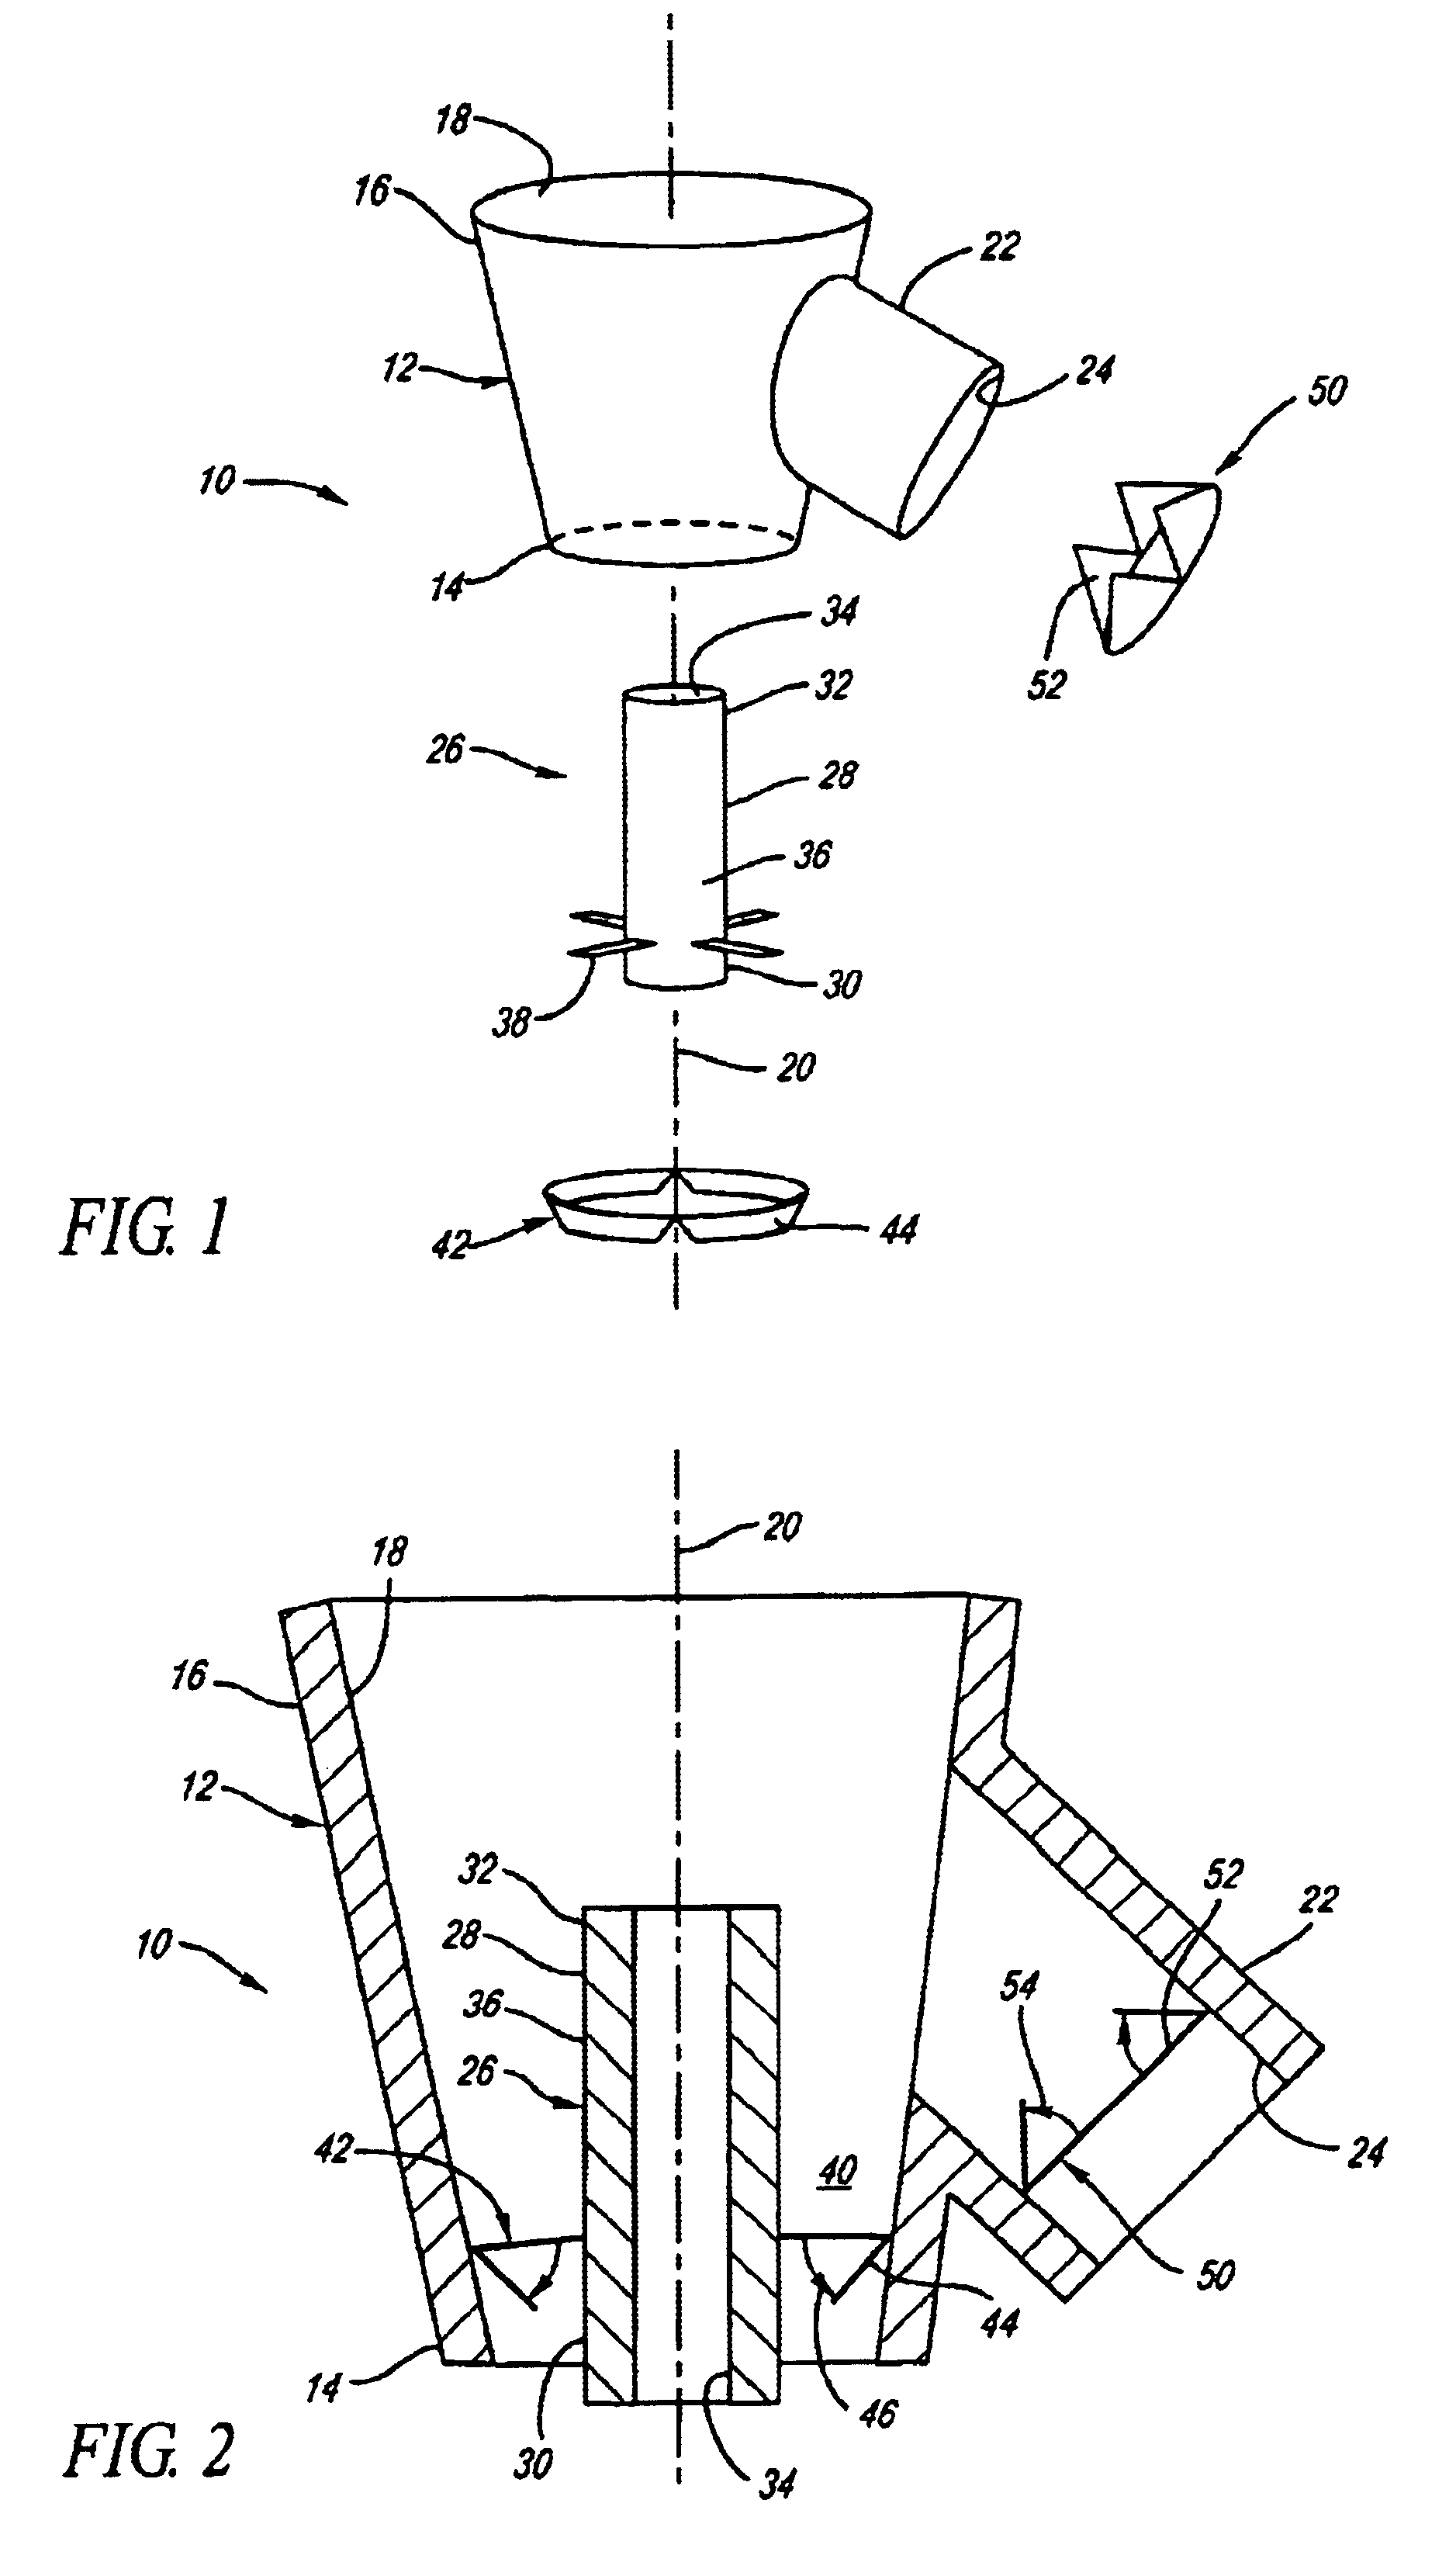 Lung assist apparatus and methods for use